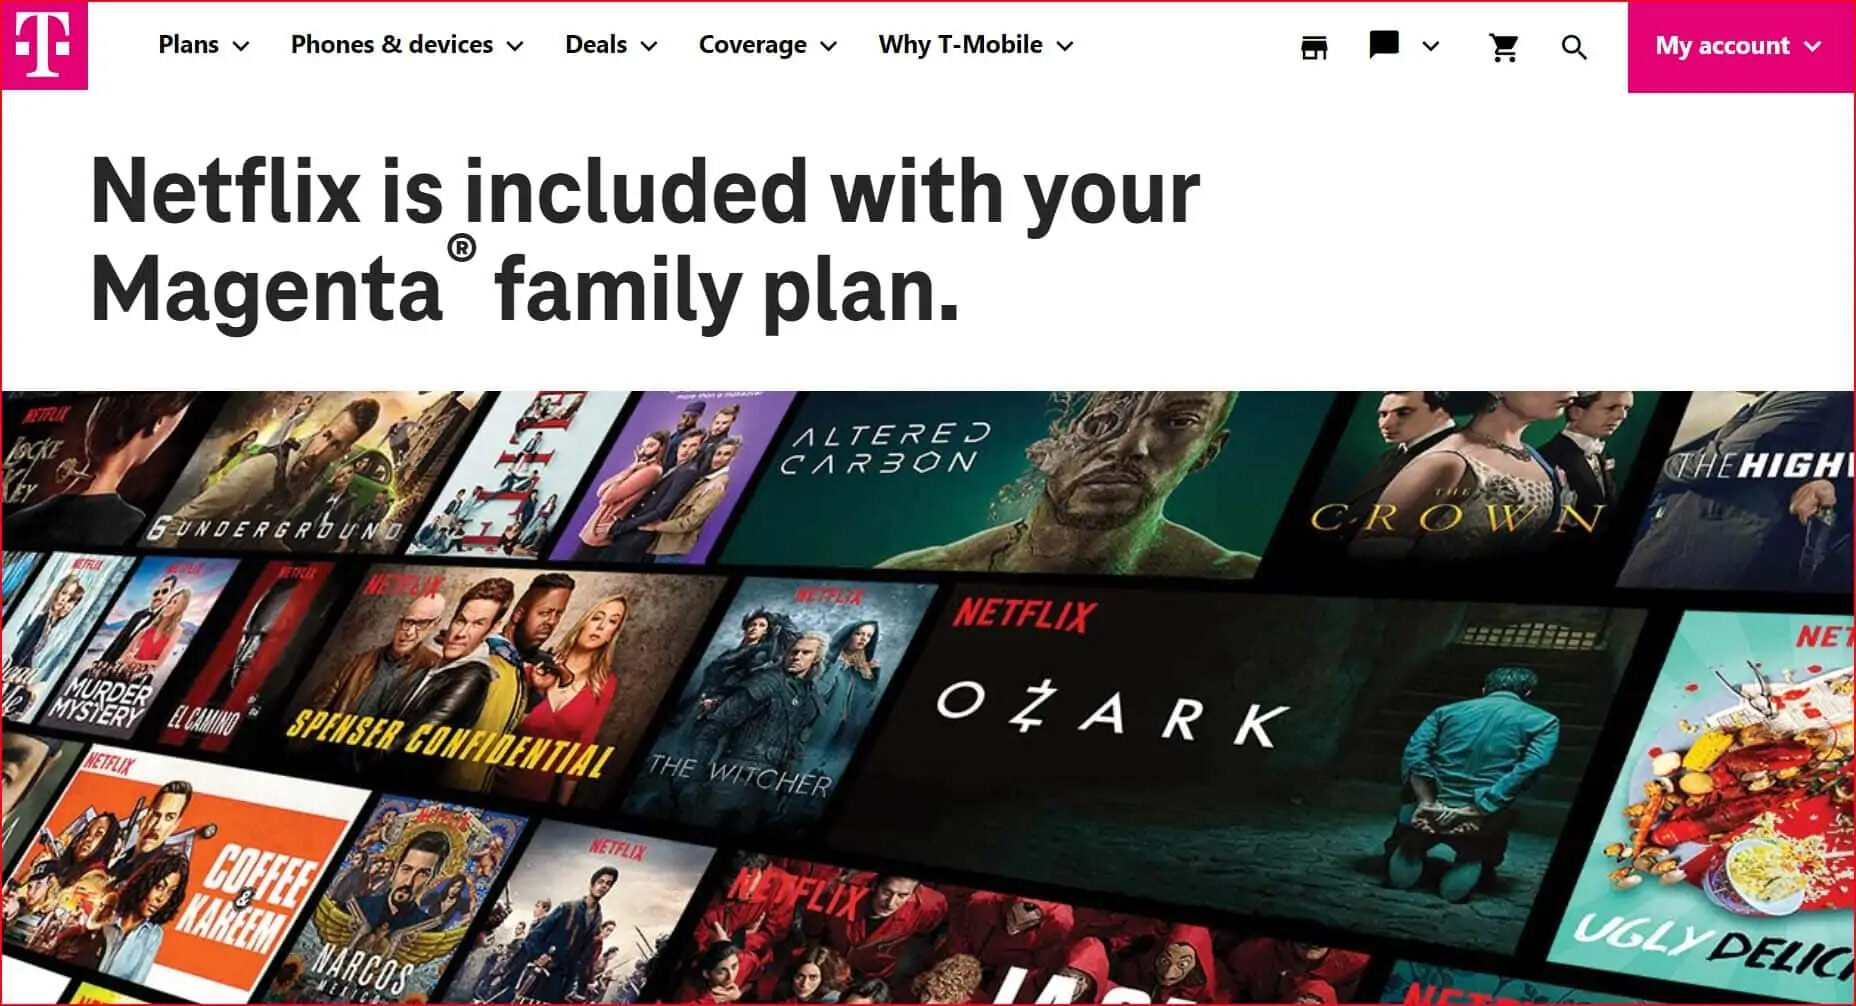 how-to-get-a-free-netflix-subscription-as-a-t-mobile-customer